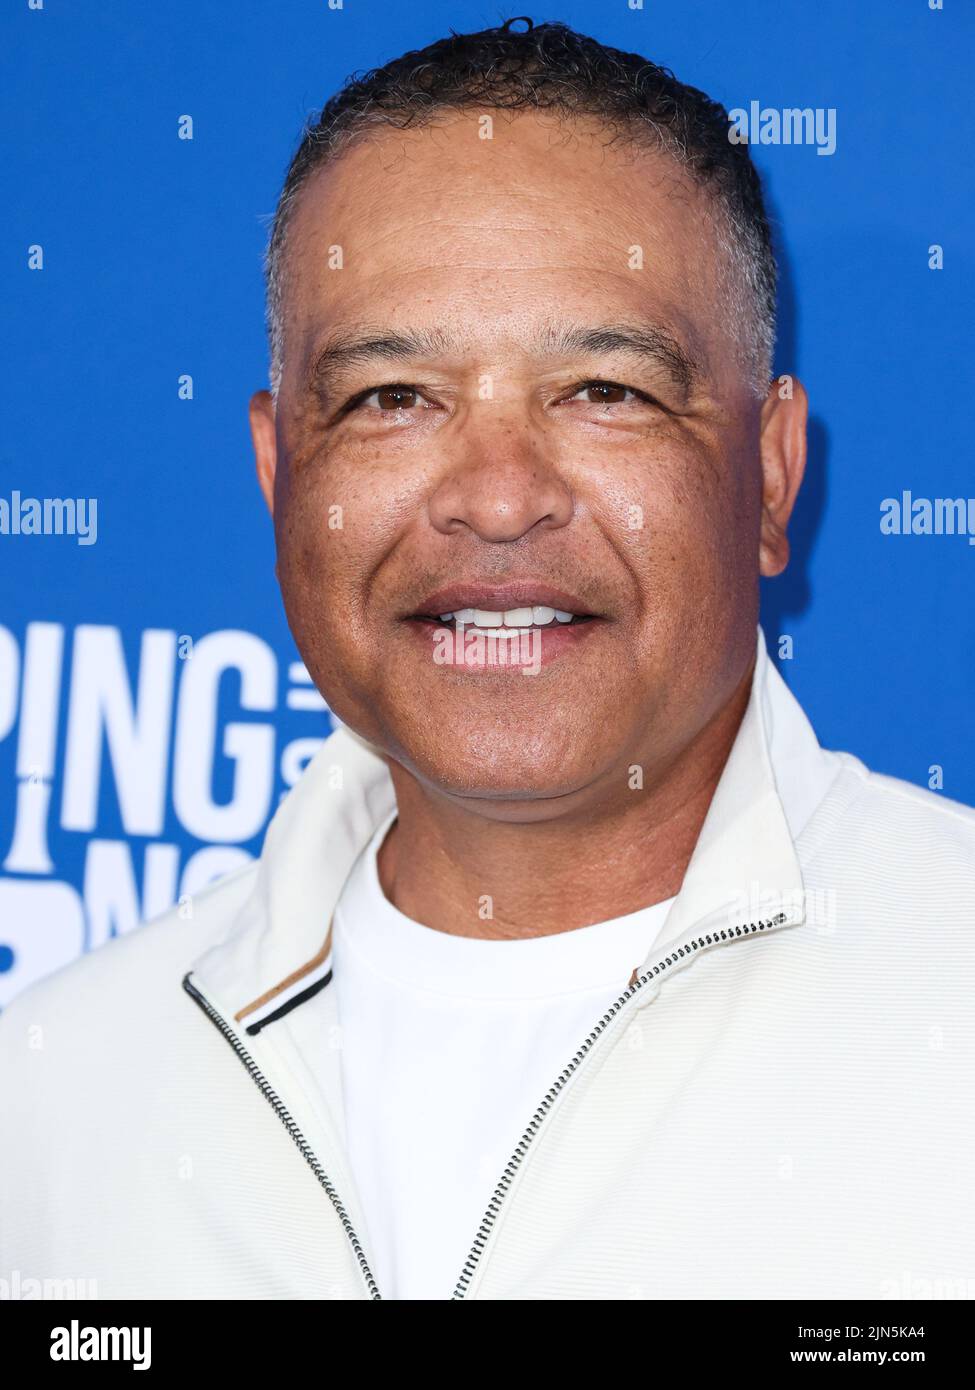 ELYSIAN PARK, LOS ANGELES, CALIFORNIA, USA - AUGUST 08: American professional baseball manager and former outfielder who is the manager of the Los Angeles Dodgers of Major League Baseball Dave Roberts (Doc) arrives at Kershaw's Challenge Ping Pong 4 Purpose 2022 held at Dodger Stadium on August 8, 2022 in Elysian Park, Los Angeles, California, United States. (Photo by Xavier Collin/Image Press Agency) Stock Photo